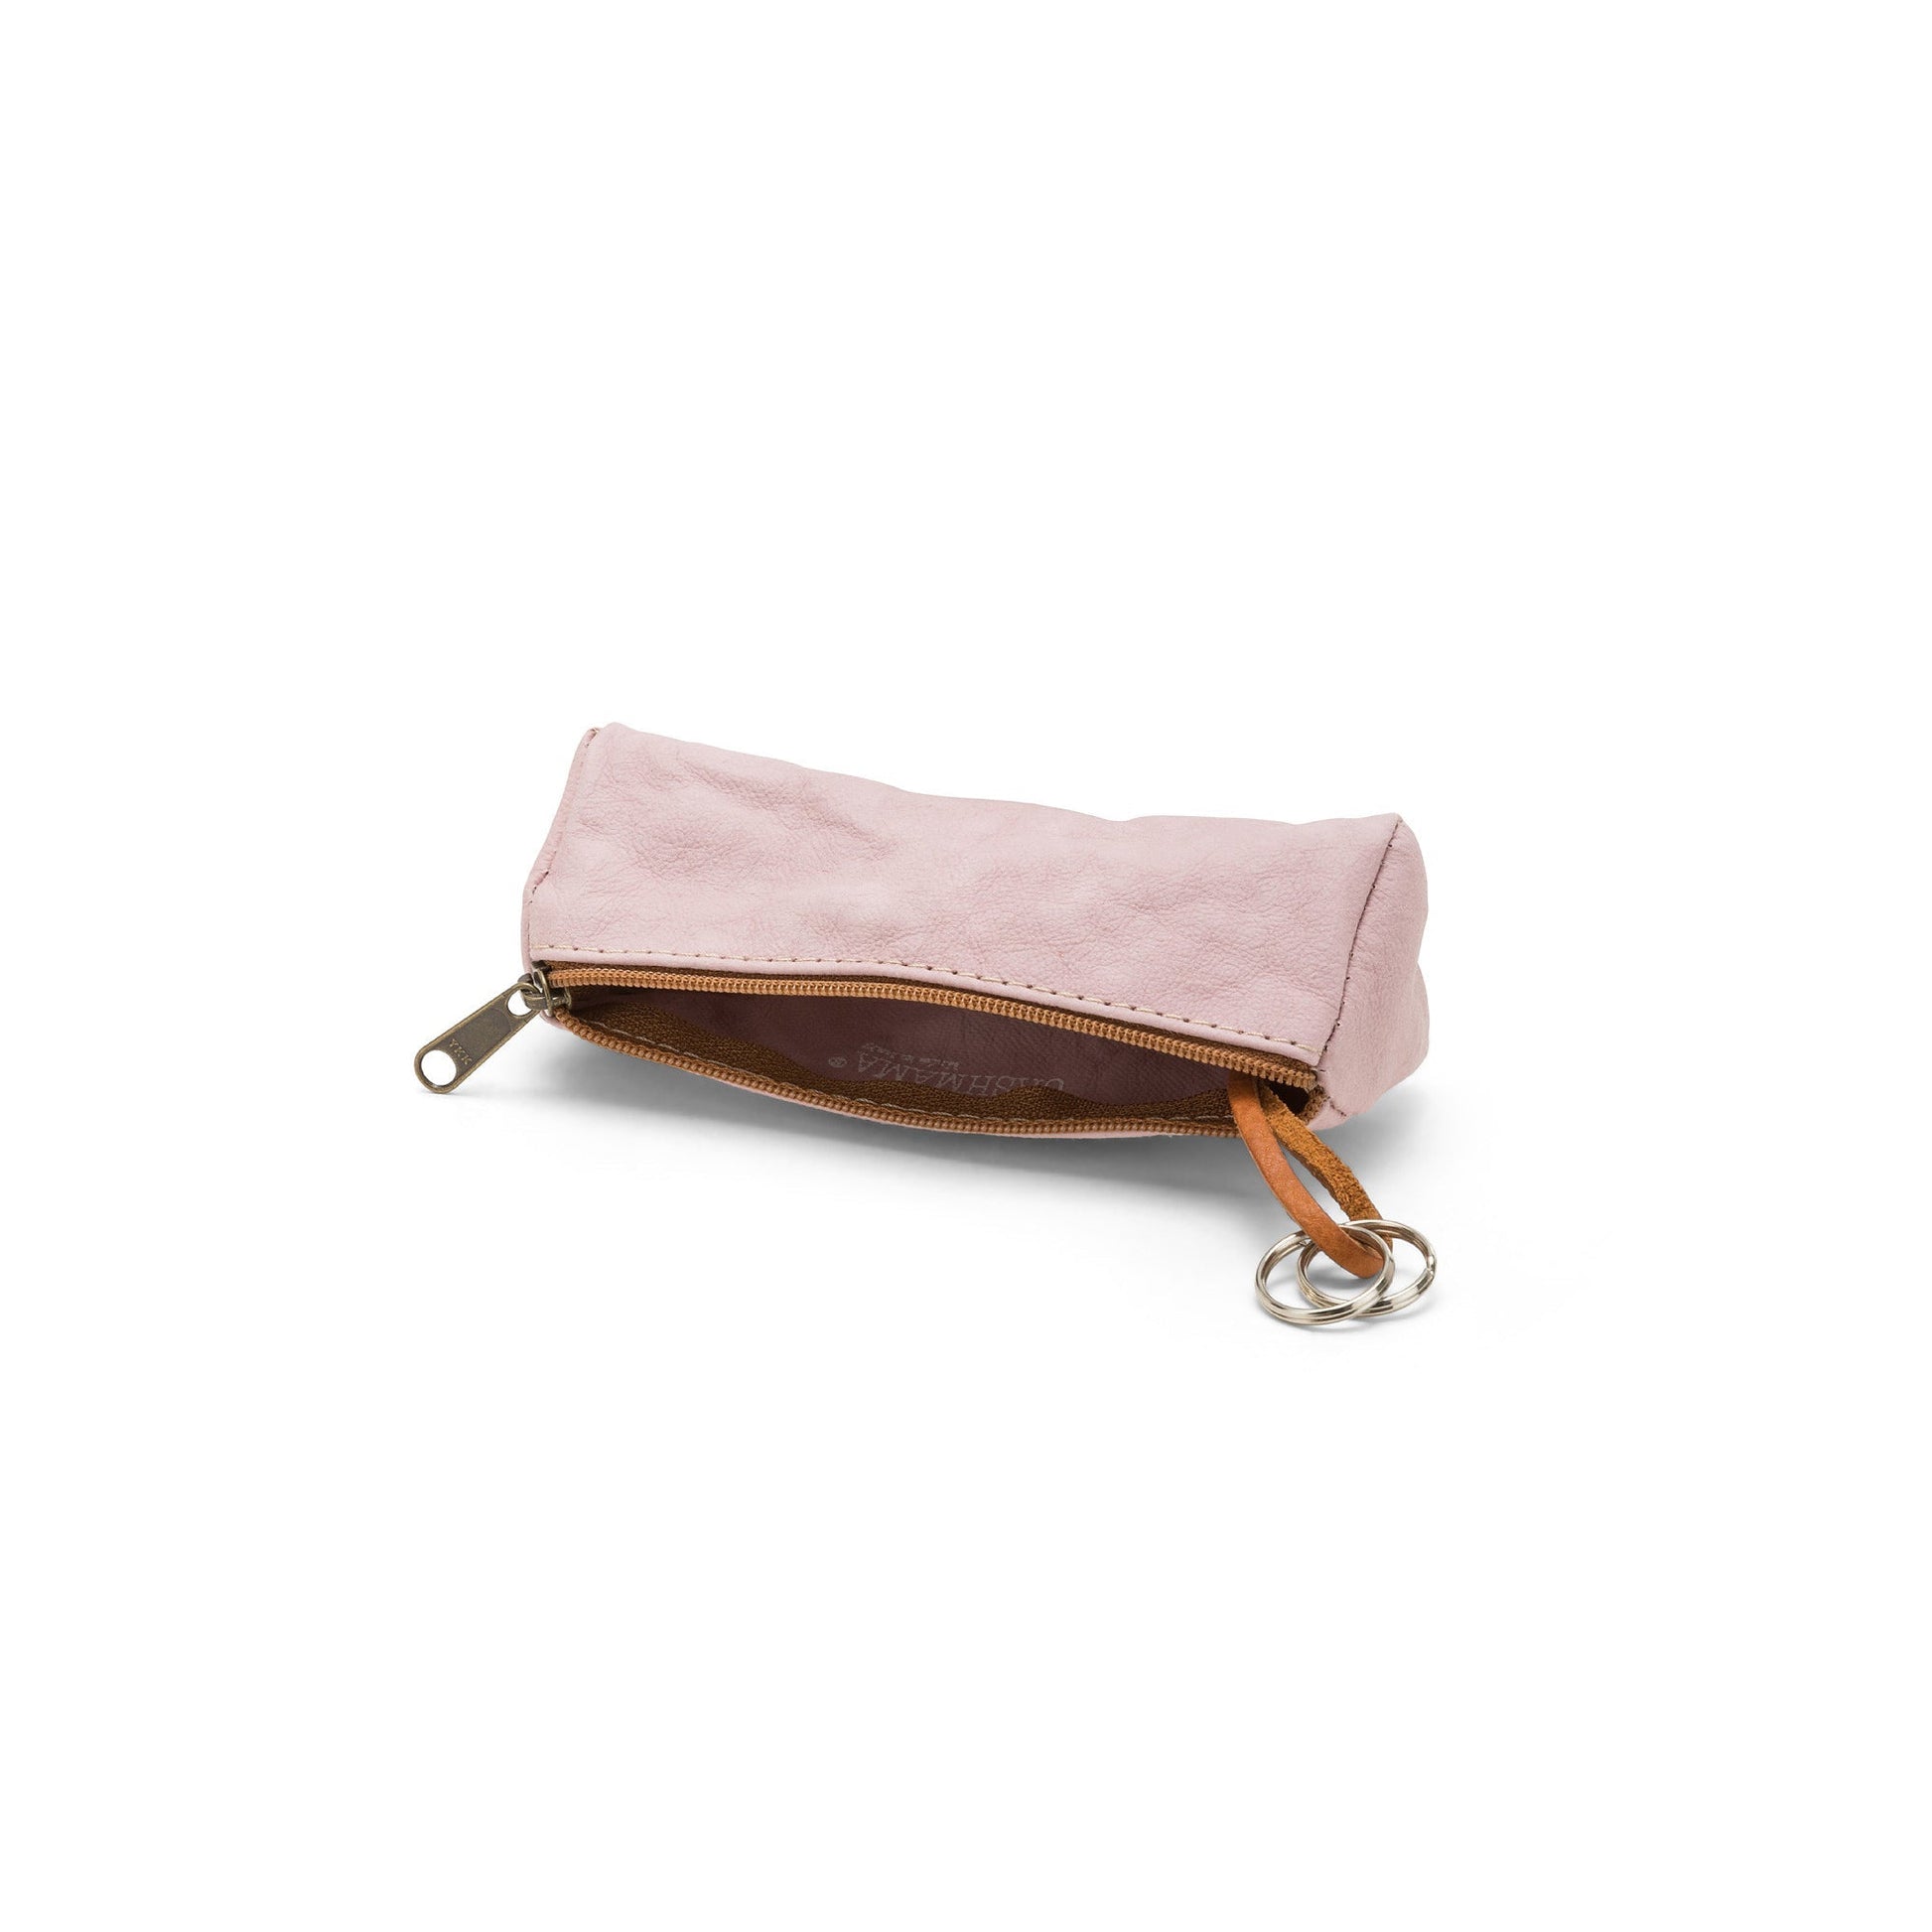 A dusky pink washable paper key holder is shown on its side, unzipped. A keyring attachment is shown on a washable paper loop from the inside.